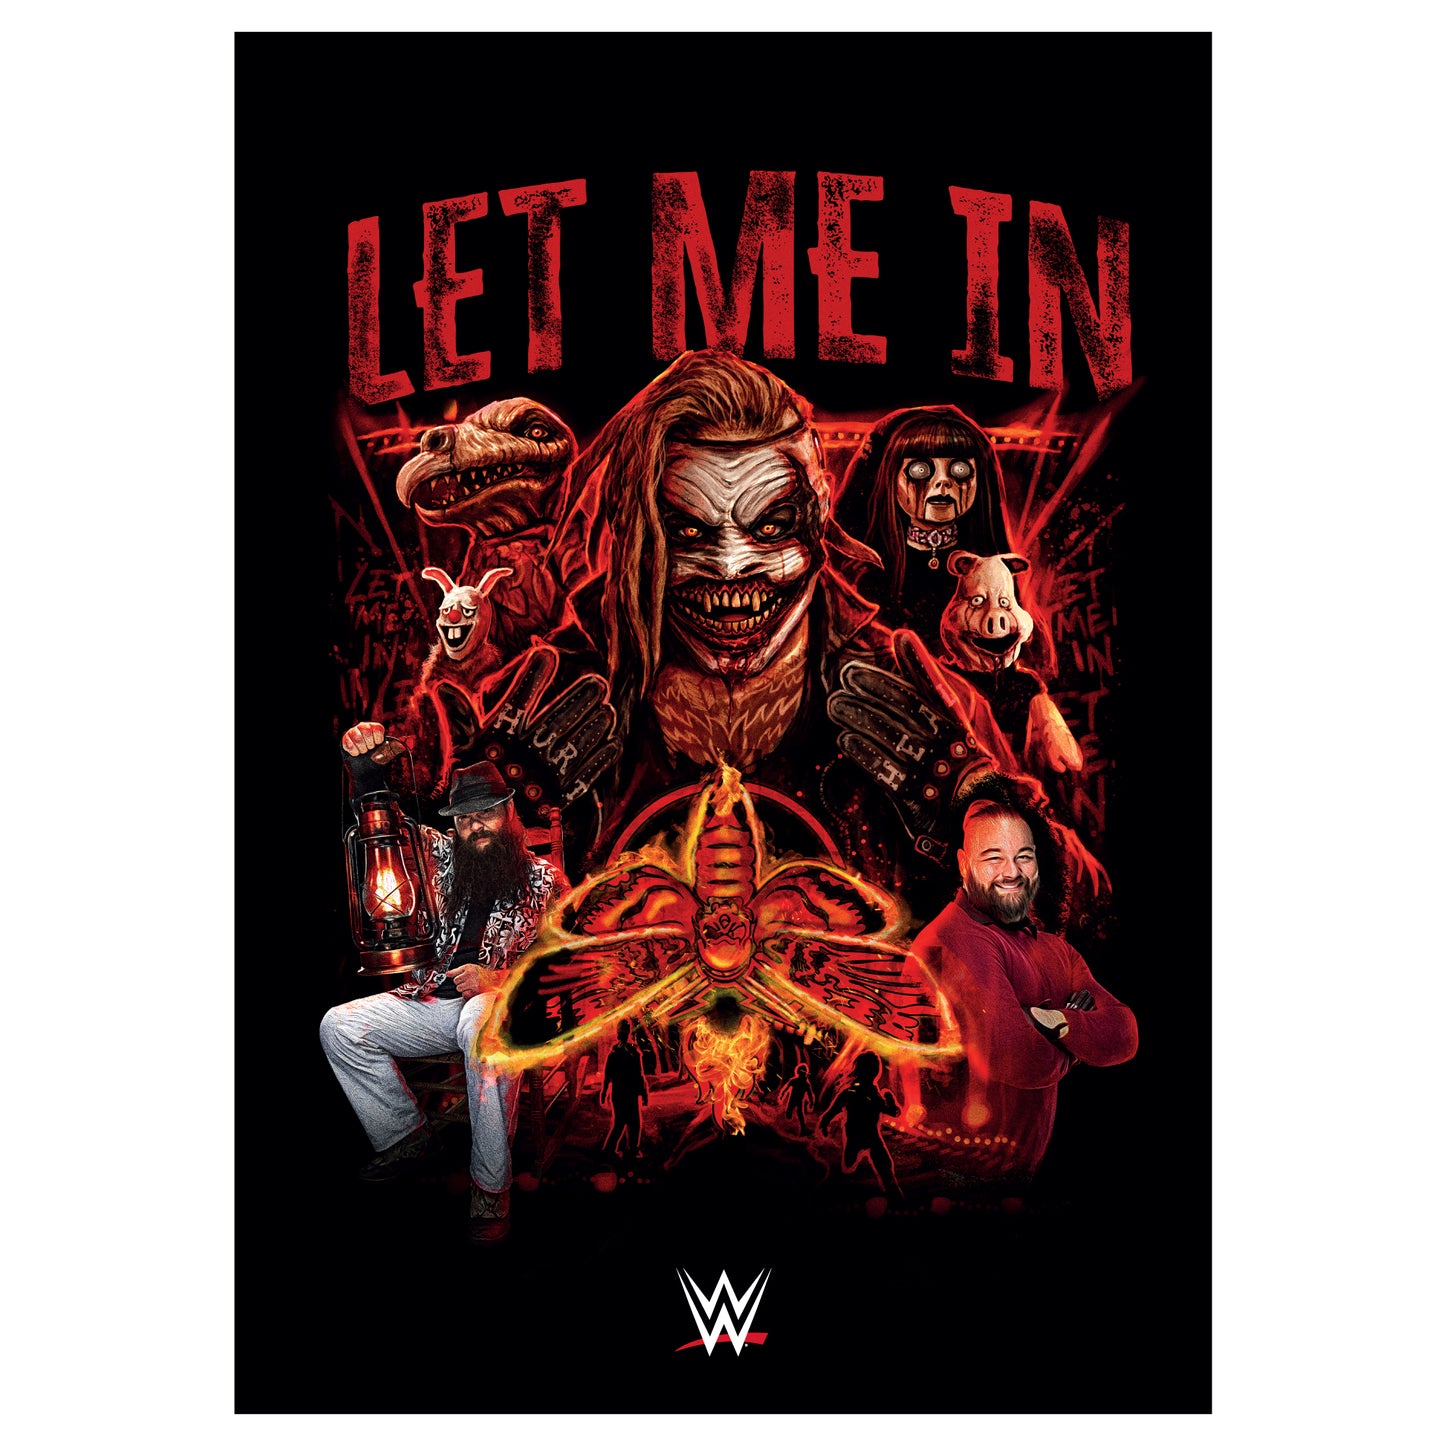 WWE Print - Bray Wyatt Let Me In Red Collage Poster Wrestling Wall Art